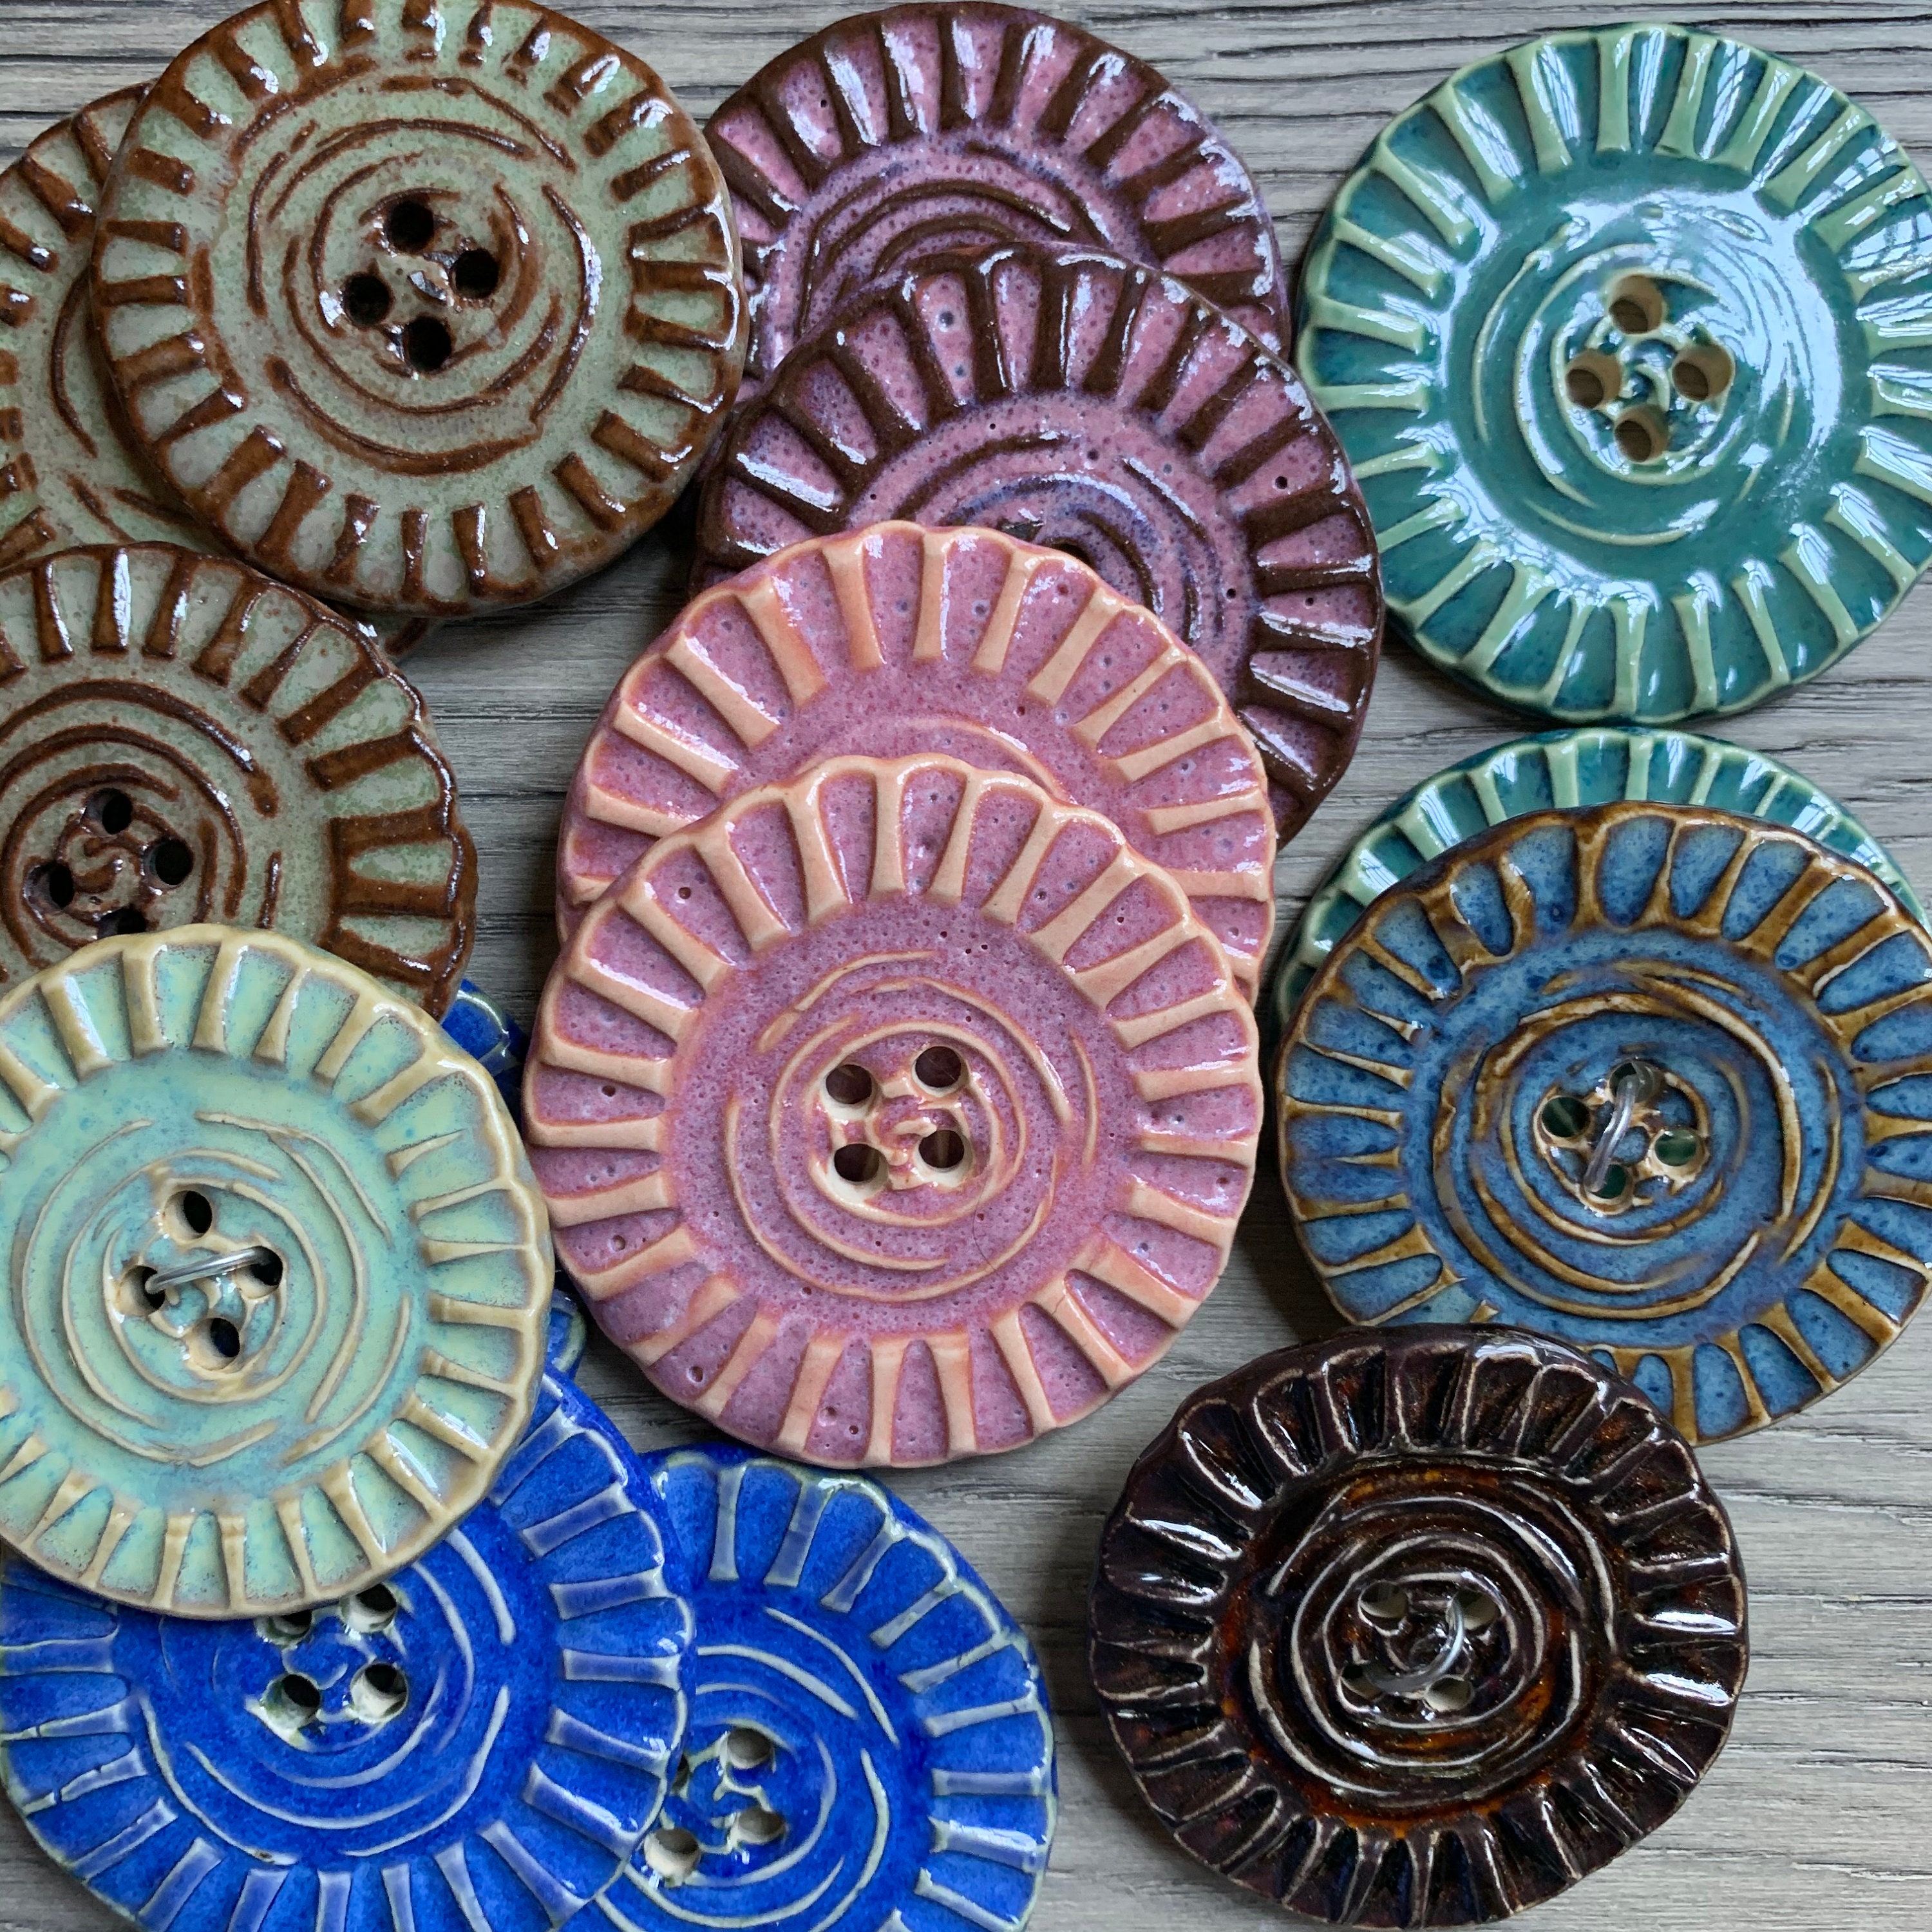 8 Pcs Sewing Buttons, Unique Big Button Lot, Handmade Ceramic Buttons For  Crafts